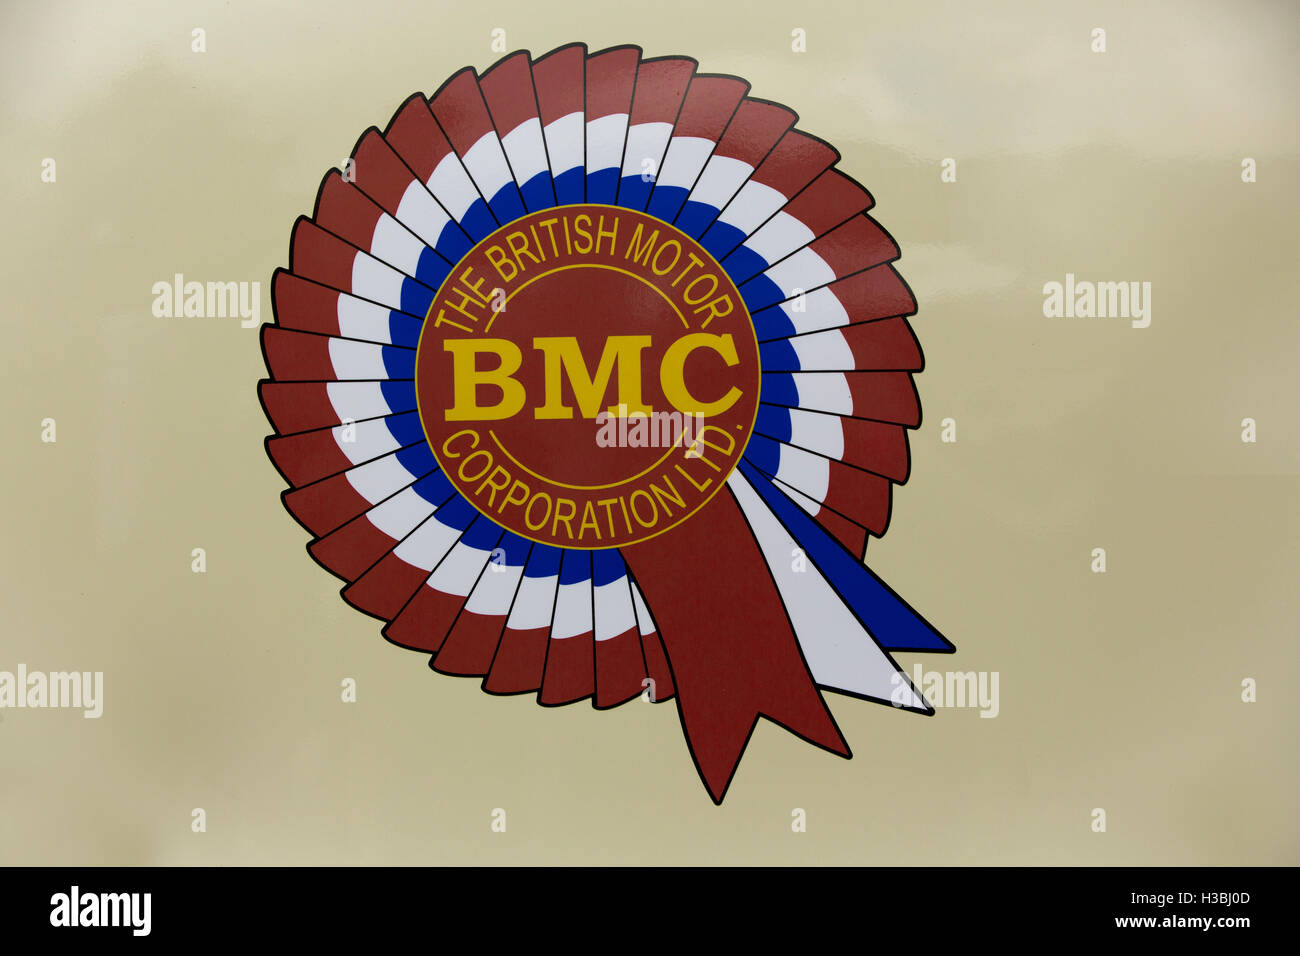 Iconic emblem of the British Motor Corporation. BMC. The brand disappeared in 1968 to become British Leyland. Distinct rosette on a beige background. Stock Photo